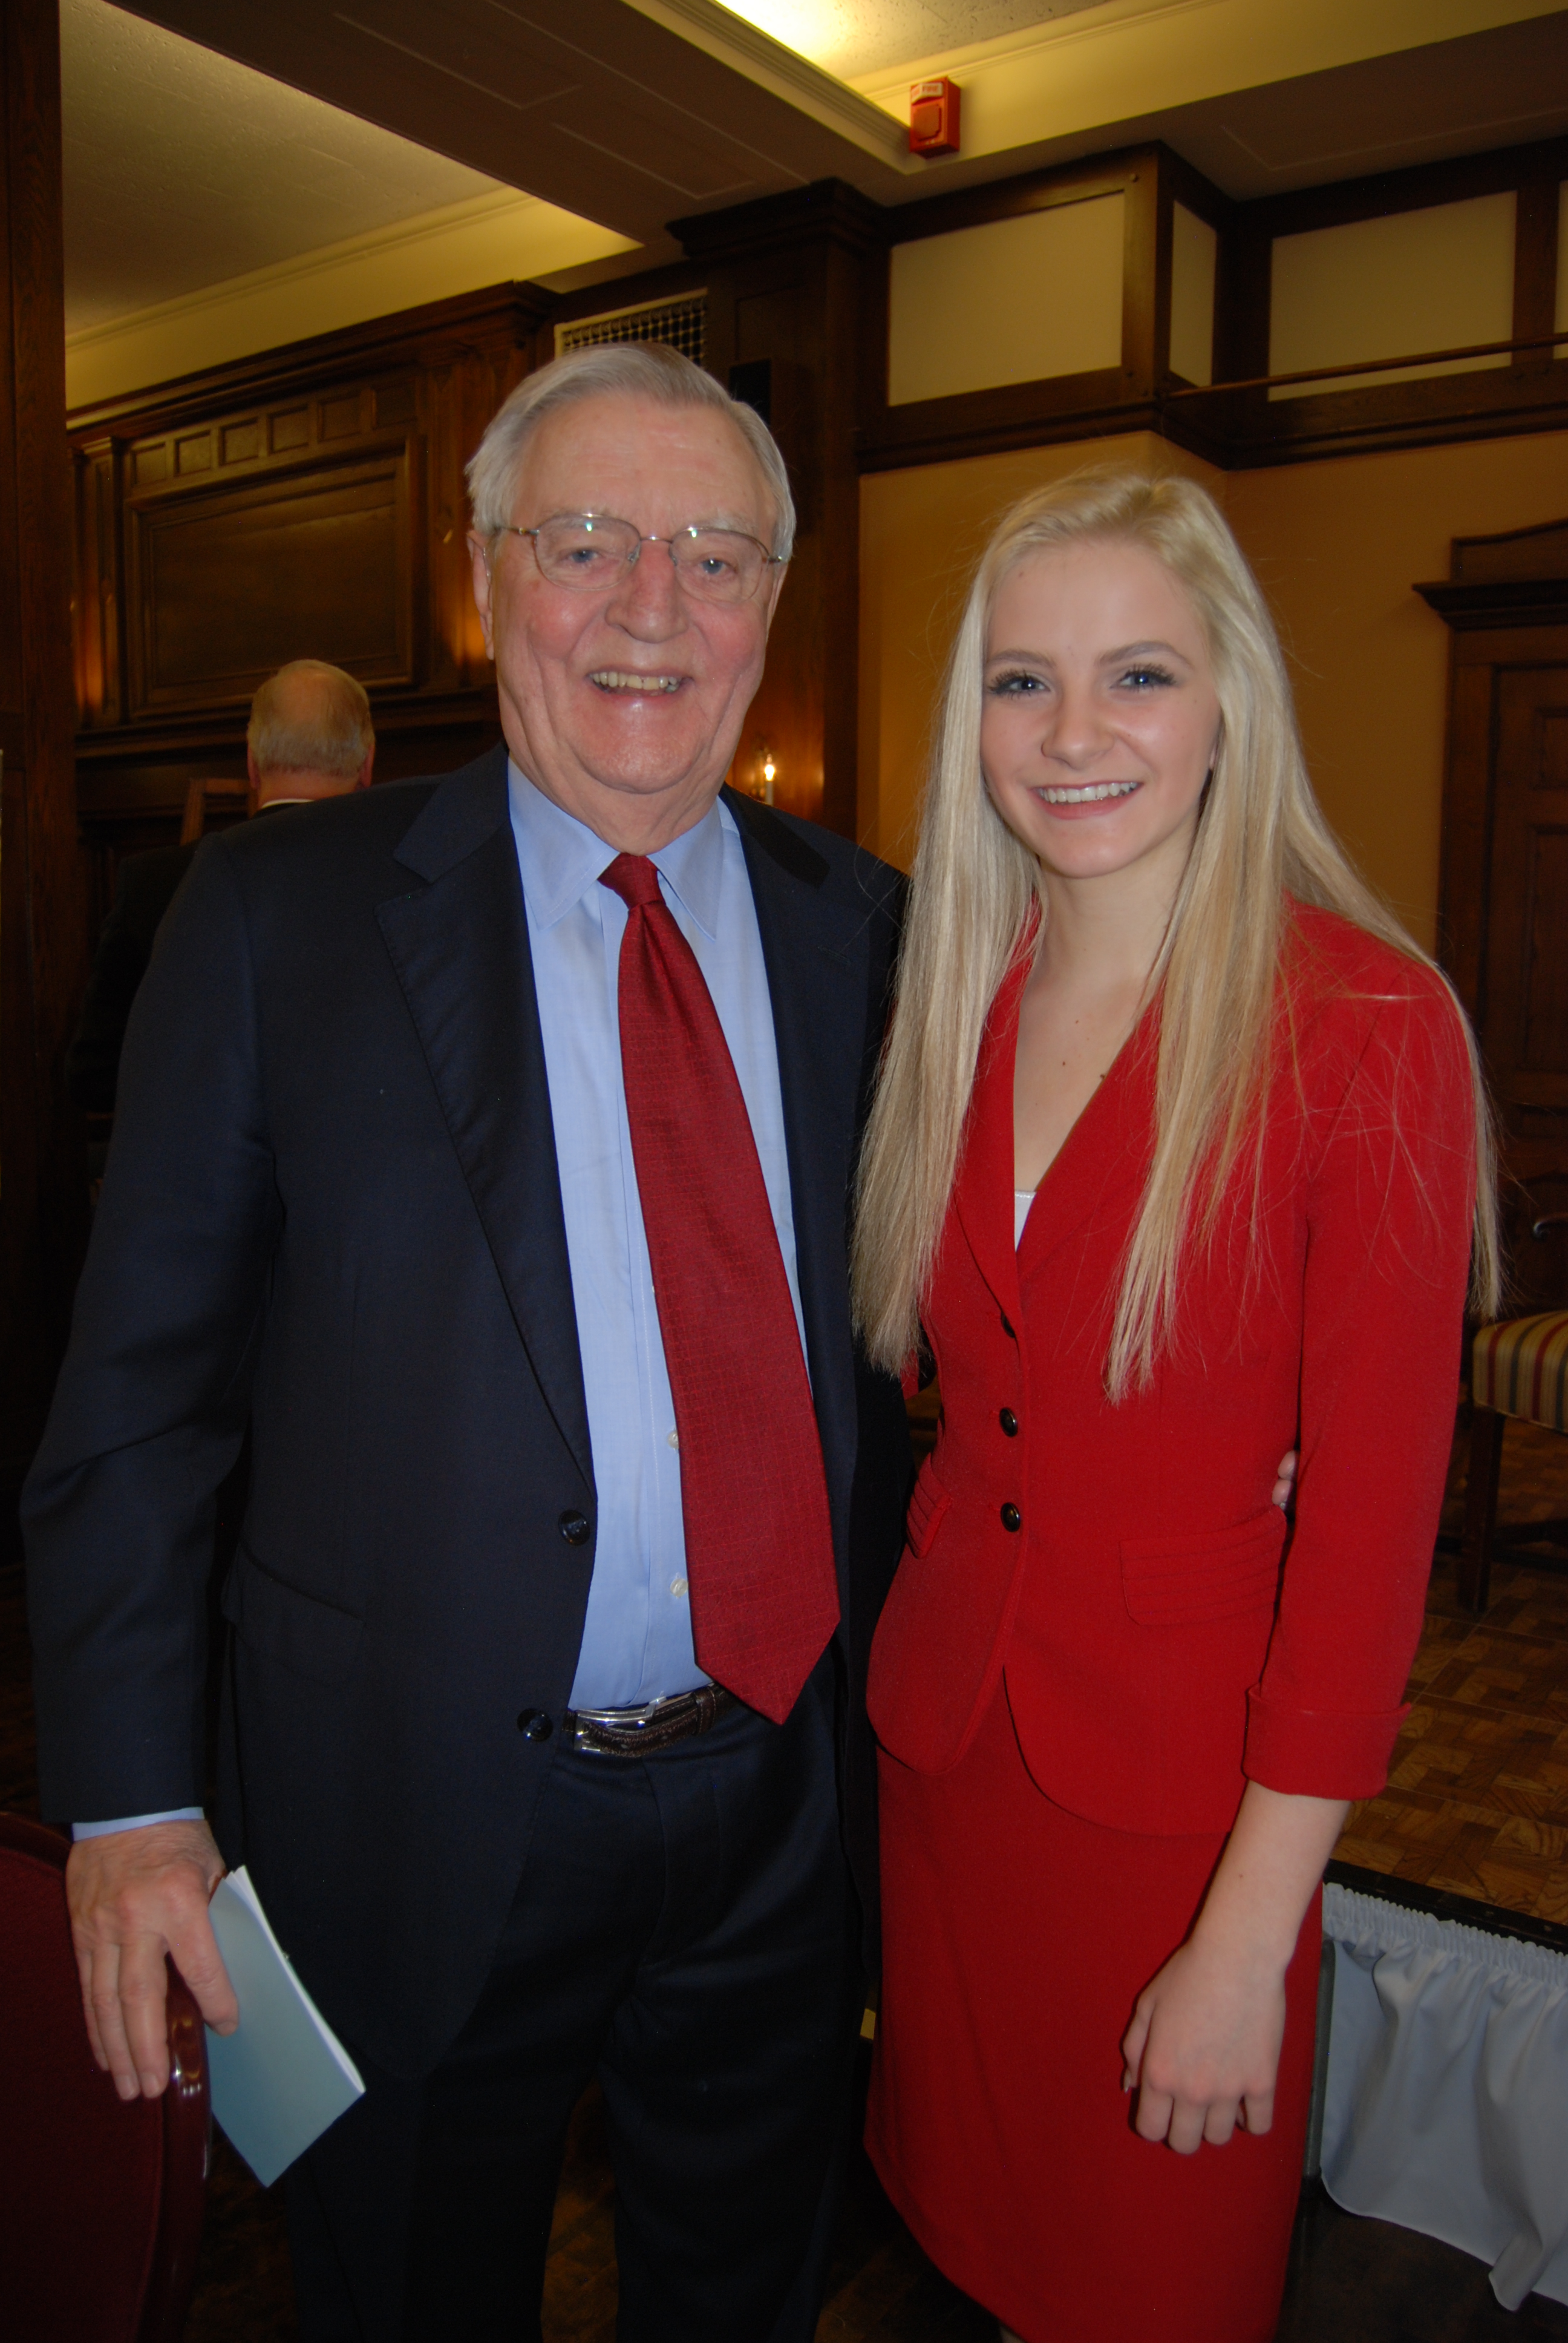 Michelle Bergh with former VP Walter Mondale at the MN Consular Corps Luncheon.